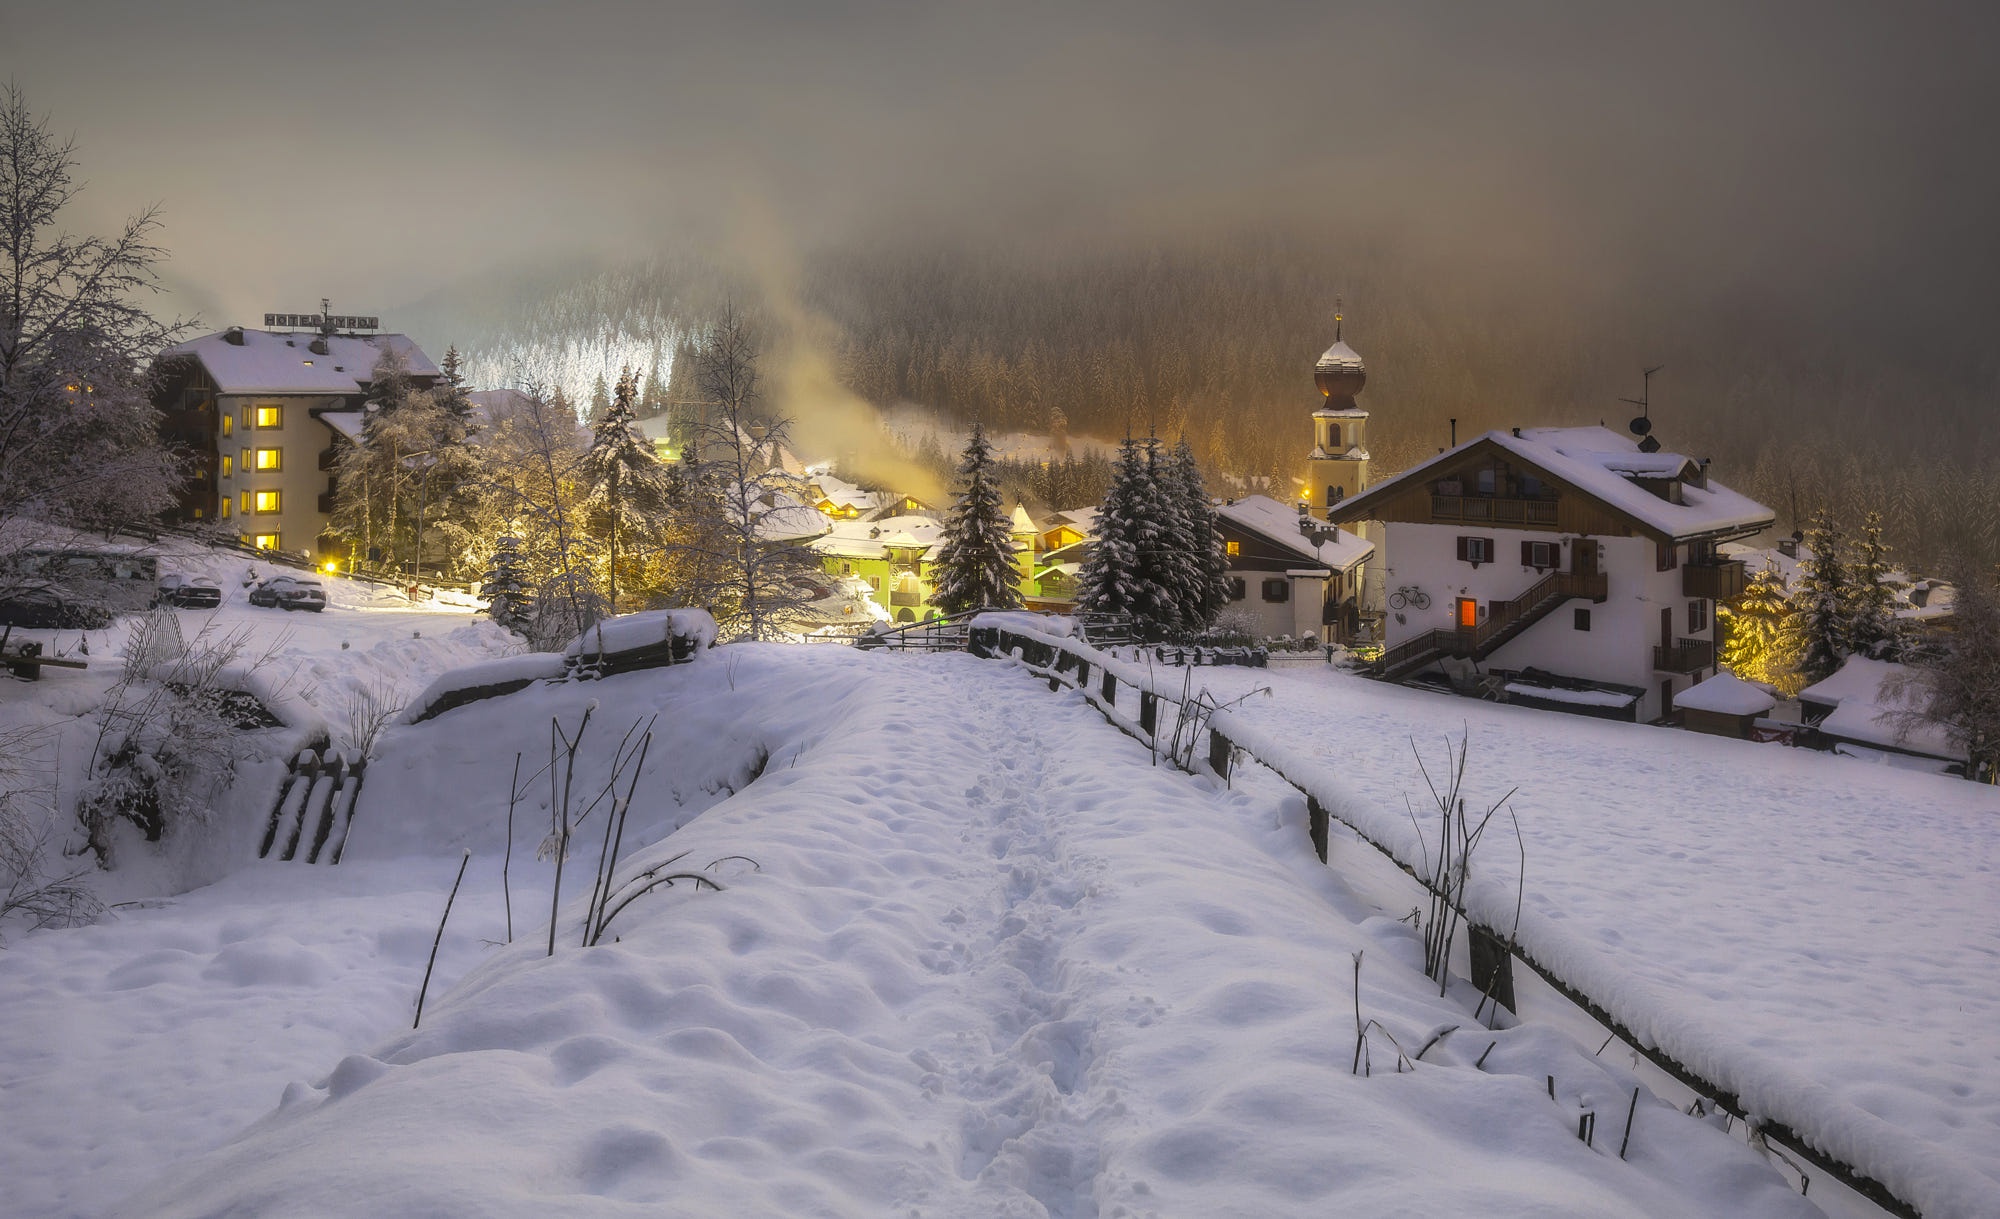 General 2000x1219 winter cold Italy evening snow lights